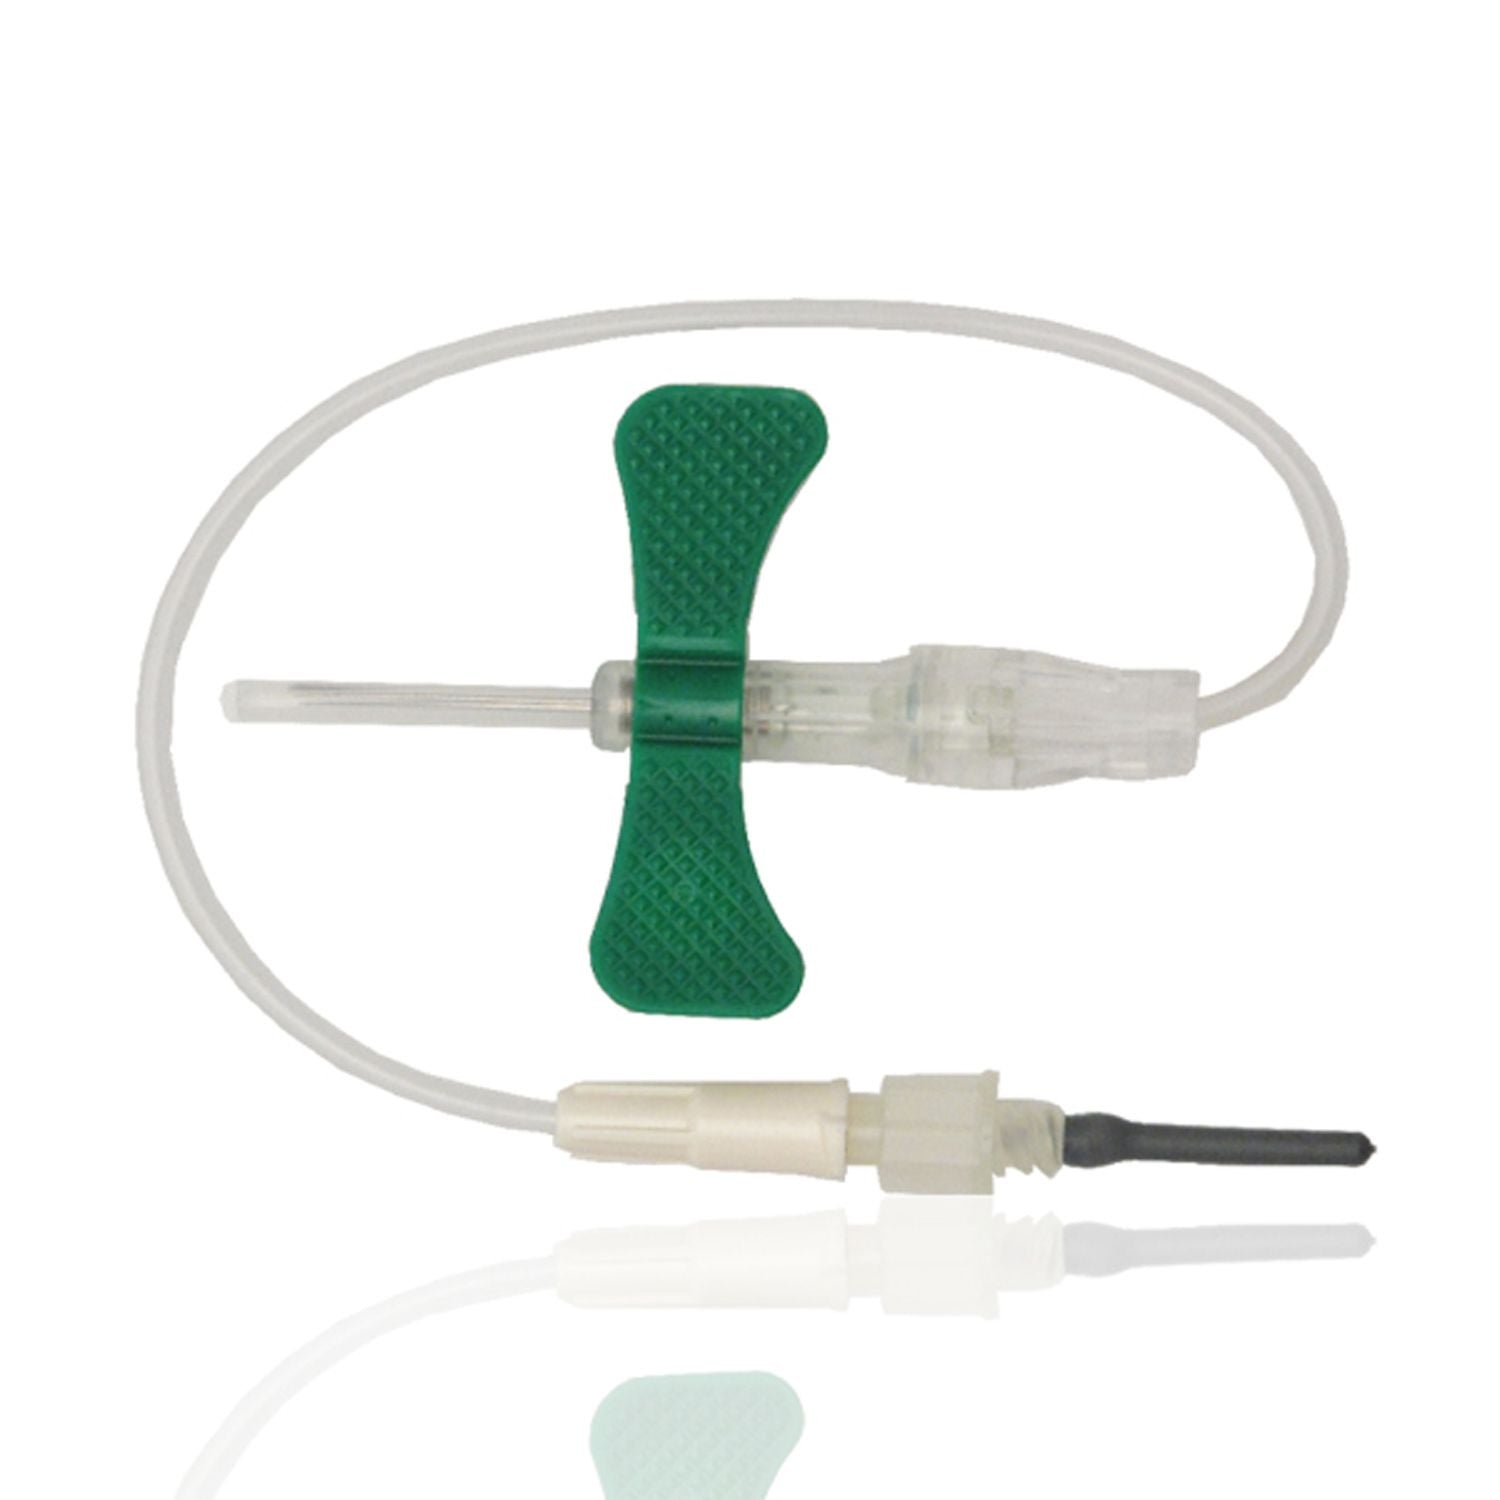 BD Vacutainer Push Button Blood Collection System | Luer Adapter | 21G, 12" Tubing | 0.75" Needle | Pack of 200